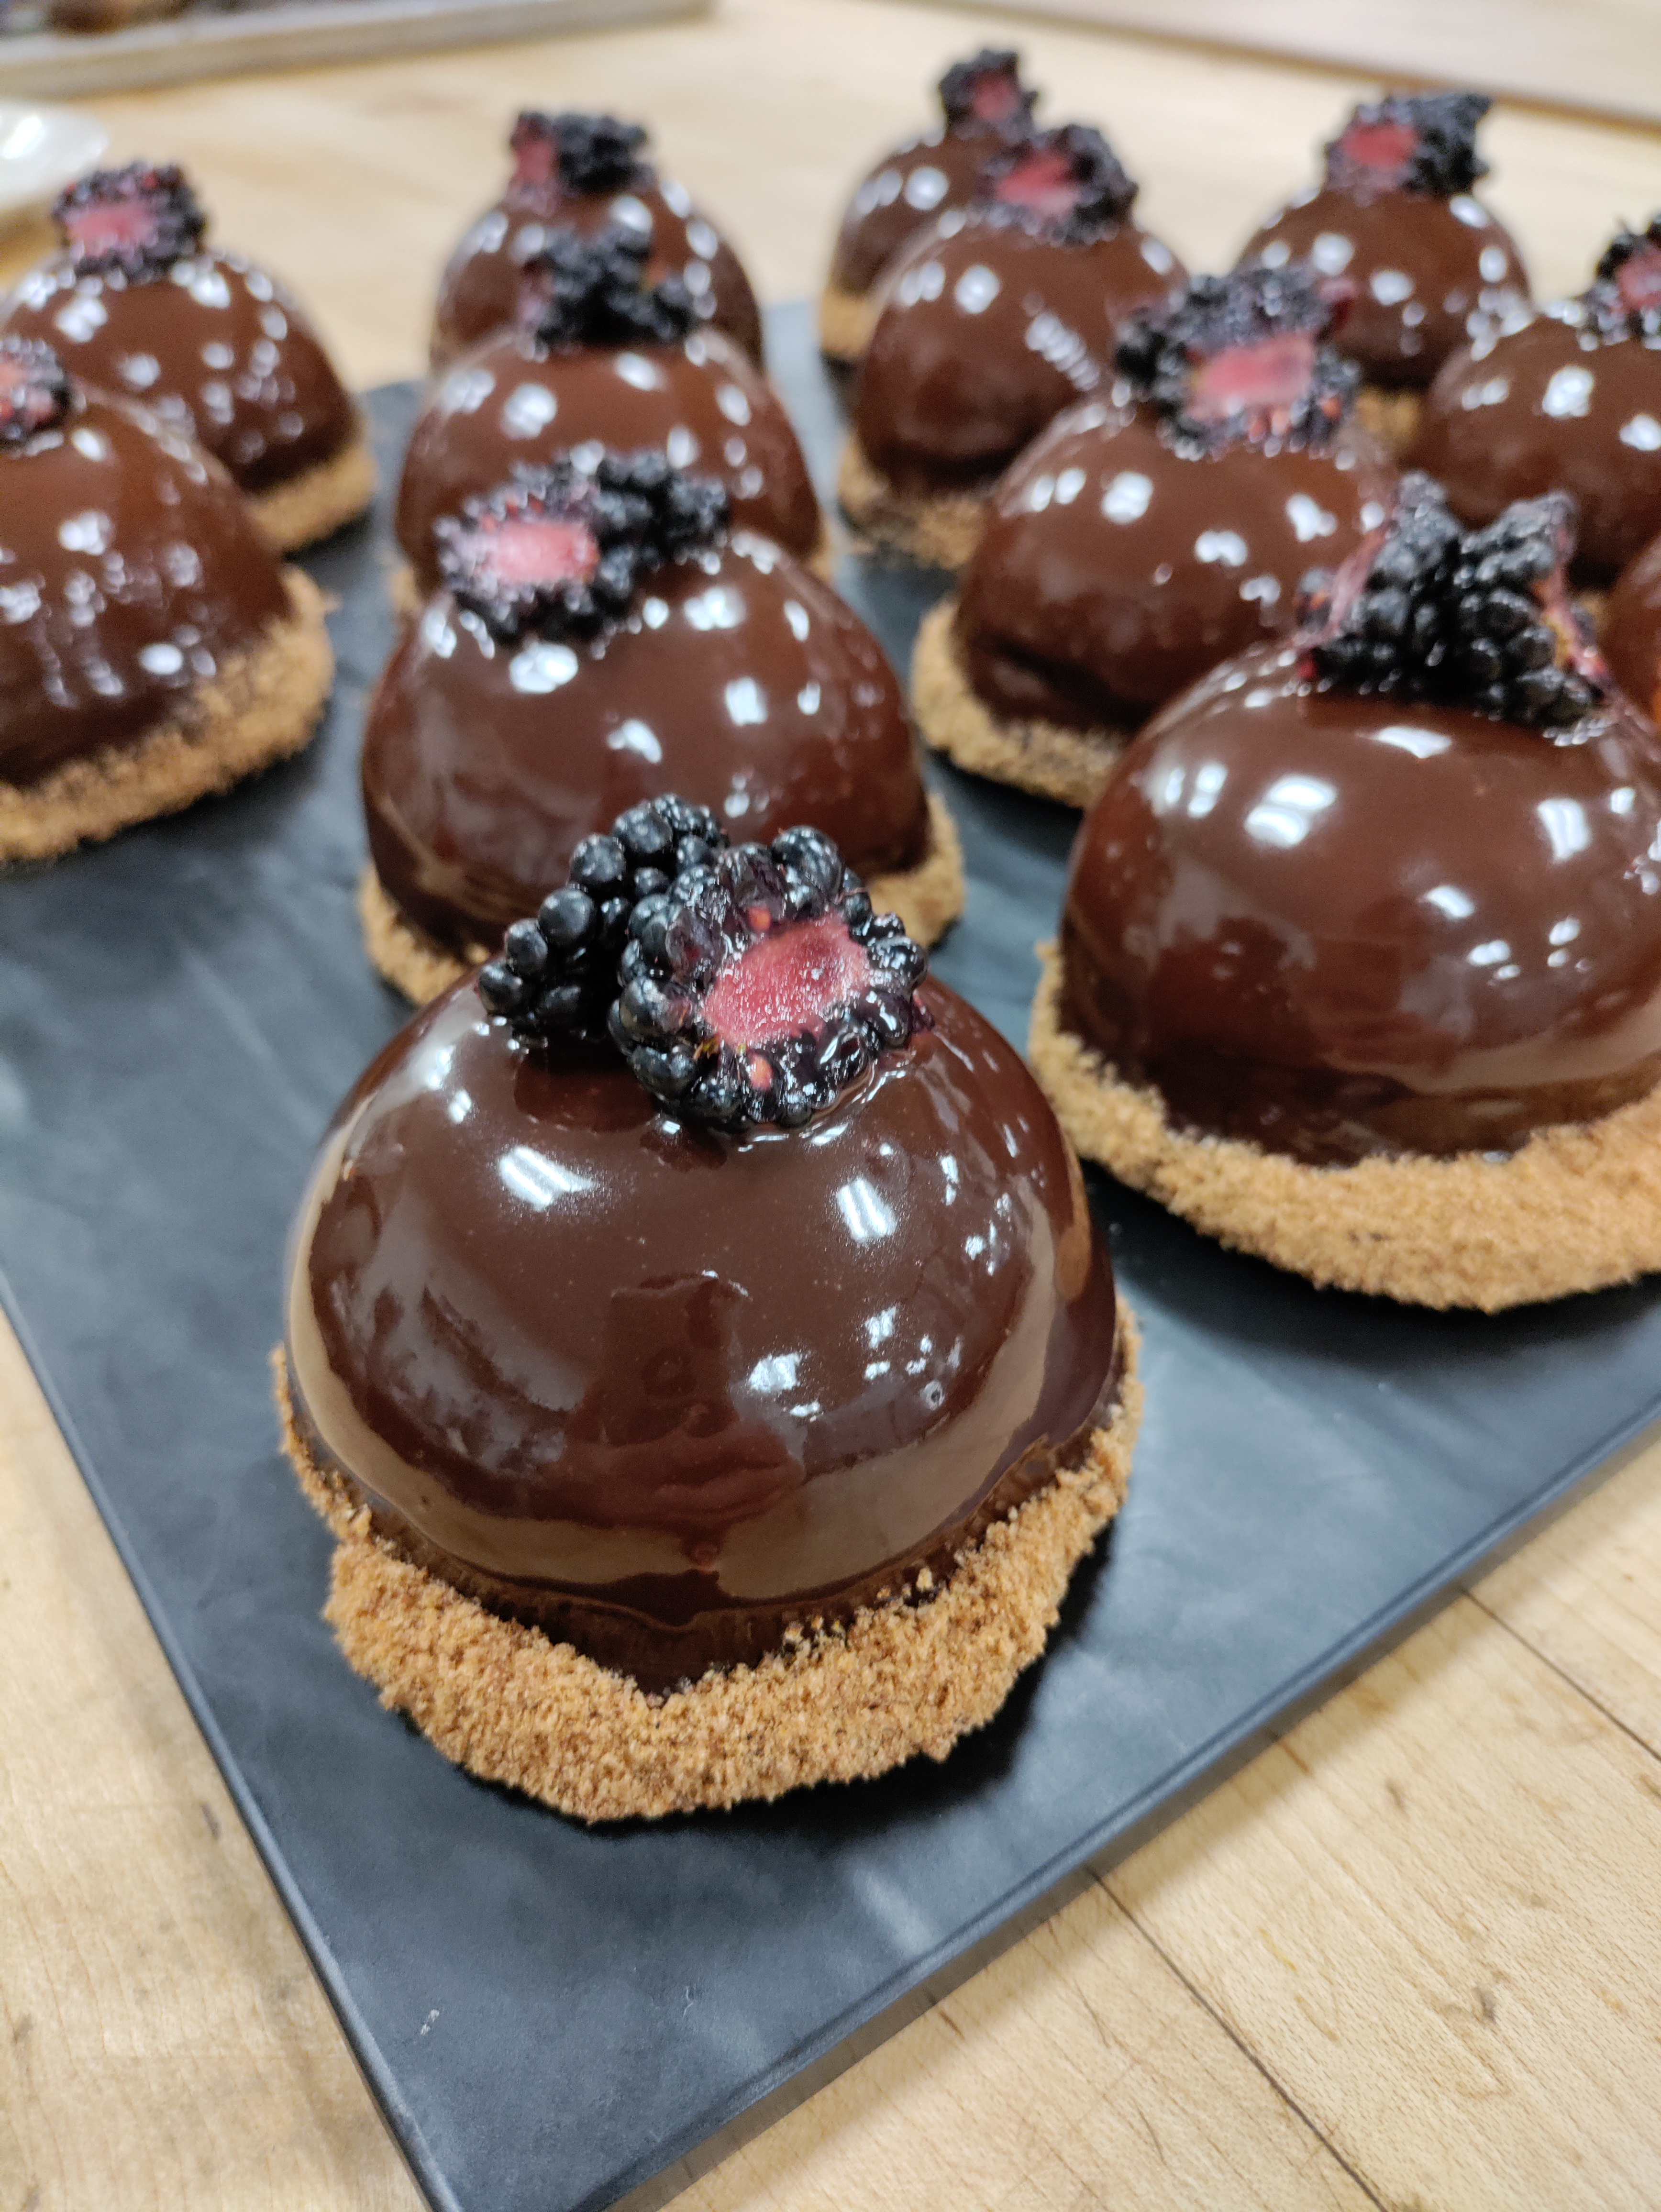 chocolate covered dome desserts topped with a split blackberry and coated with graham crumbs around the base on top of a black board